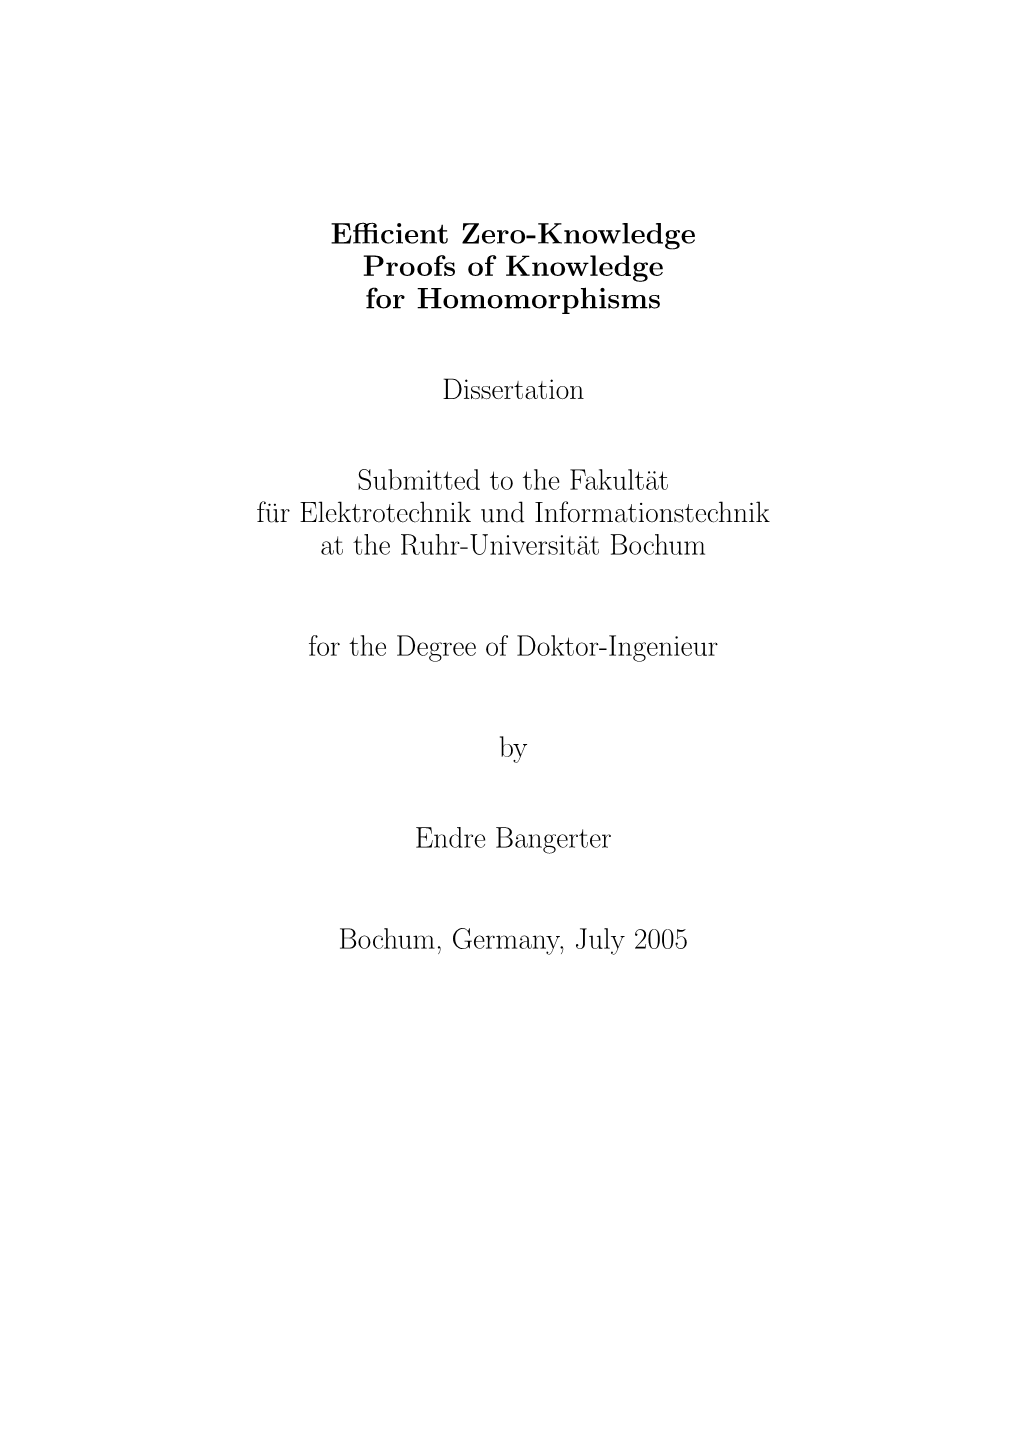 Efficient Zero-Knowledge Proofs of Knowledge for Homomorphisms